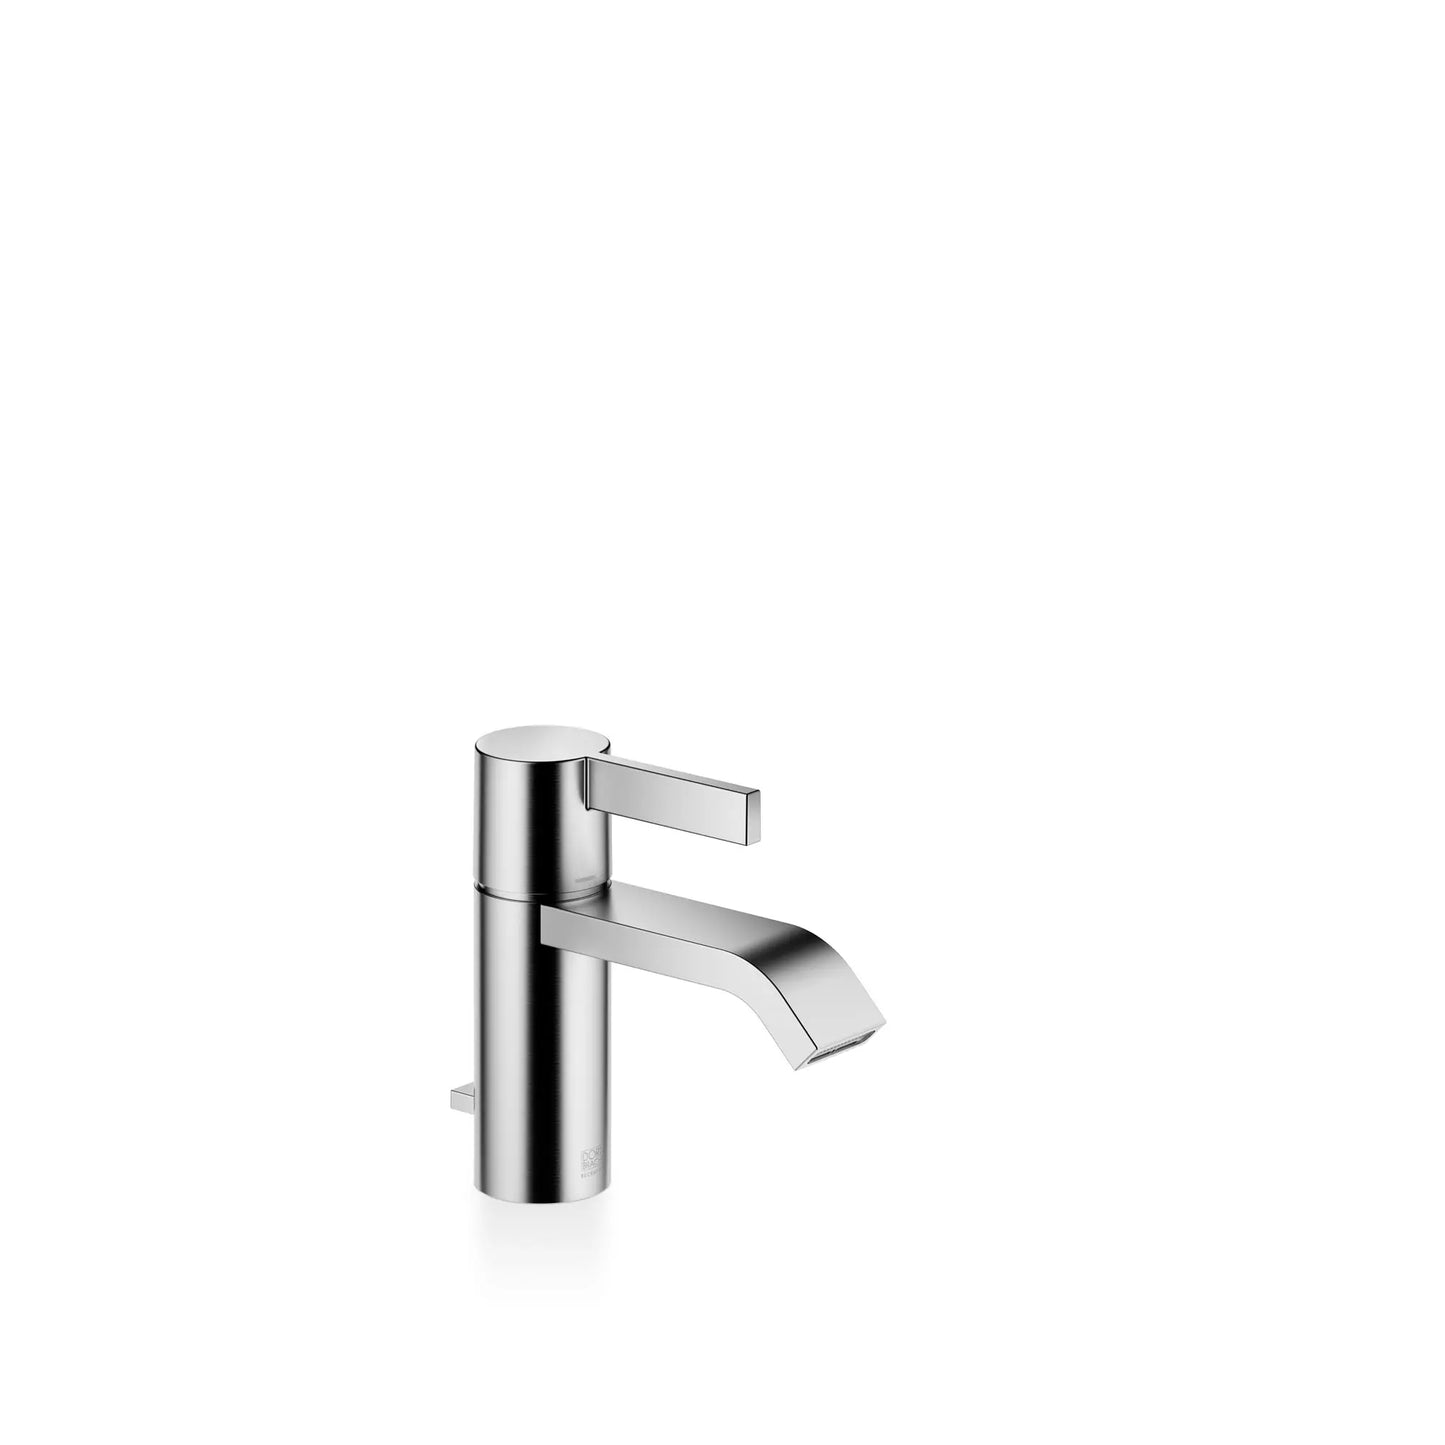 IMO Single-lever basin mixer with pop-up waste